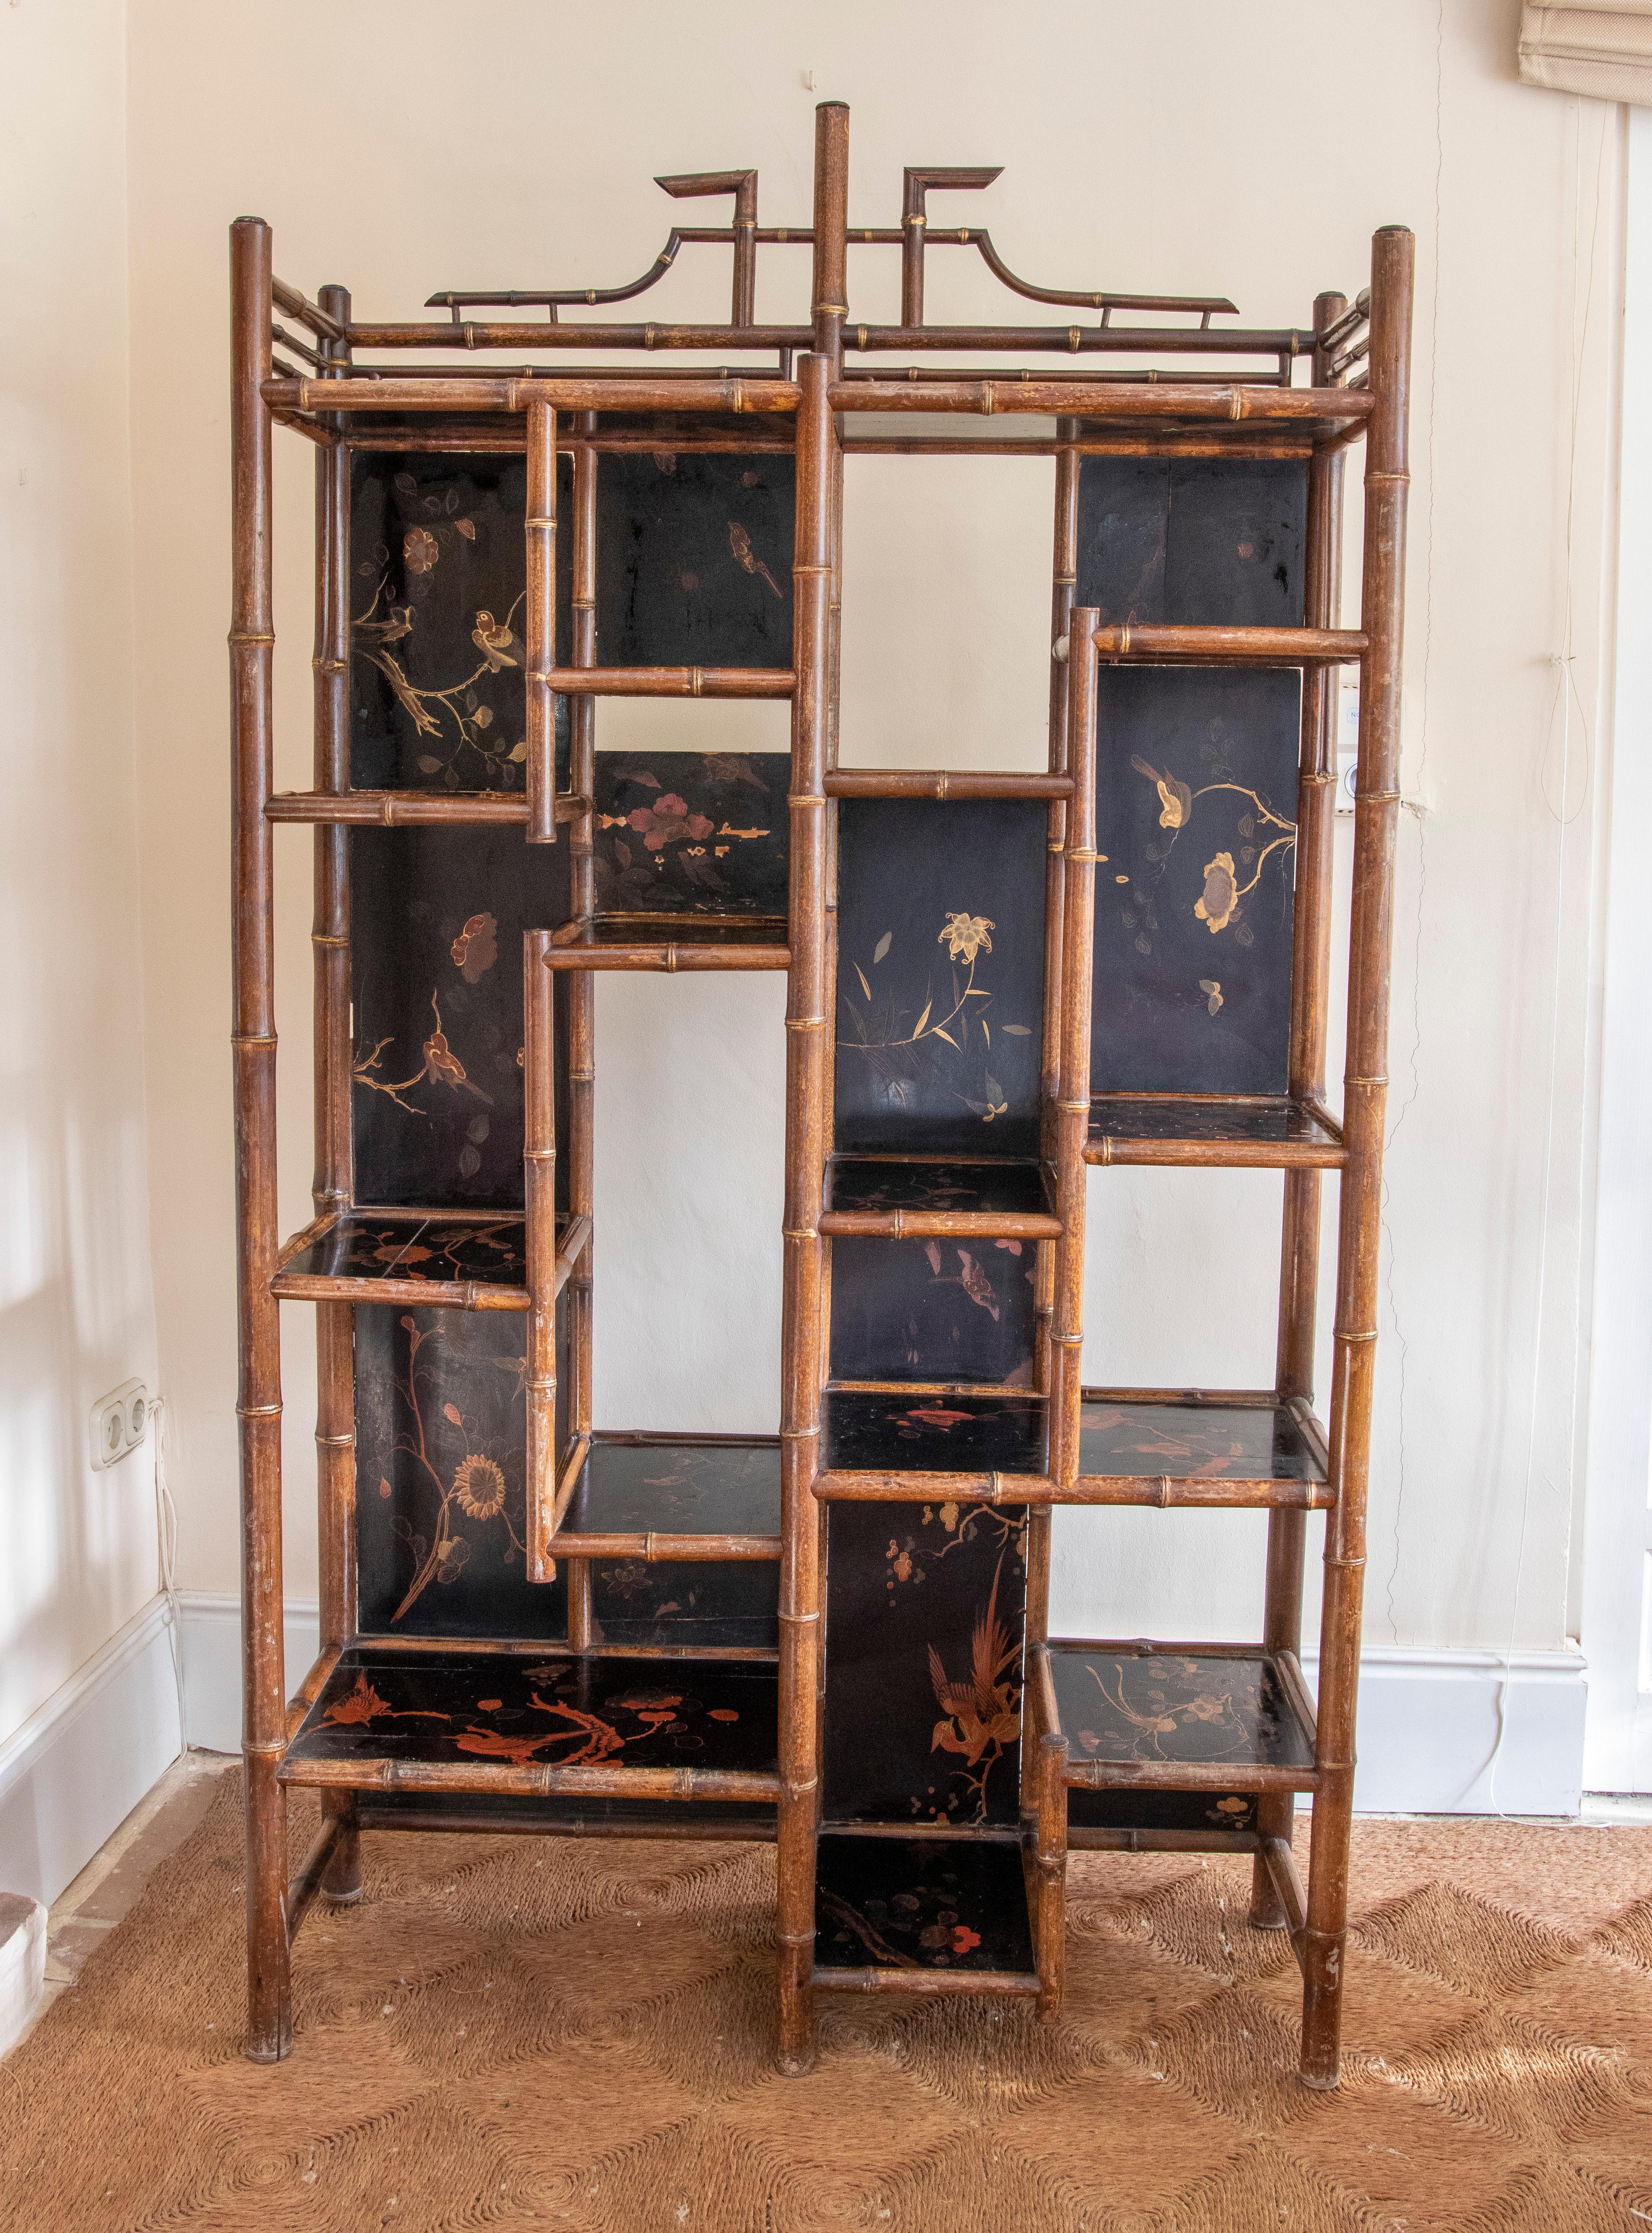 19th century English Chinoiserie style bamboo bookcase with Lacquered decoration.